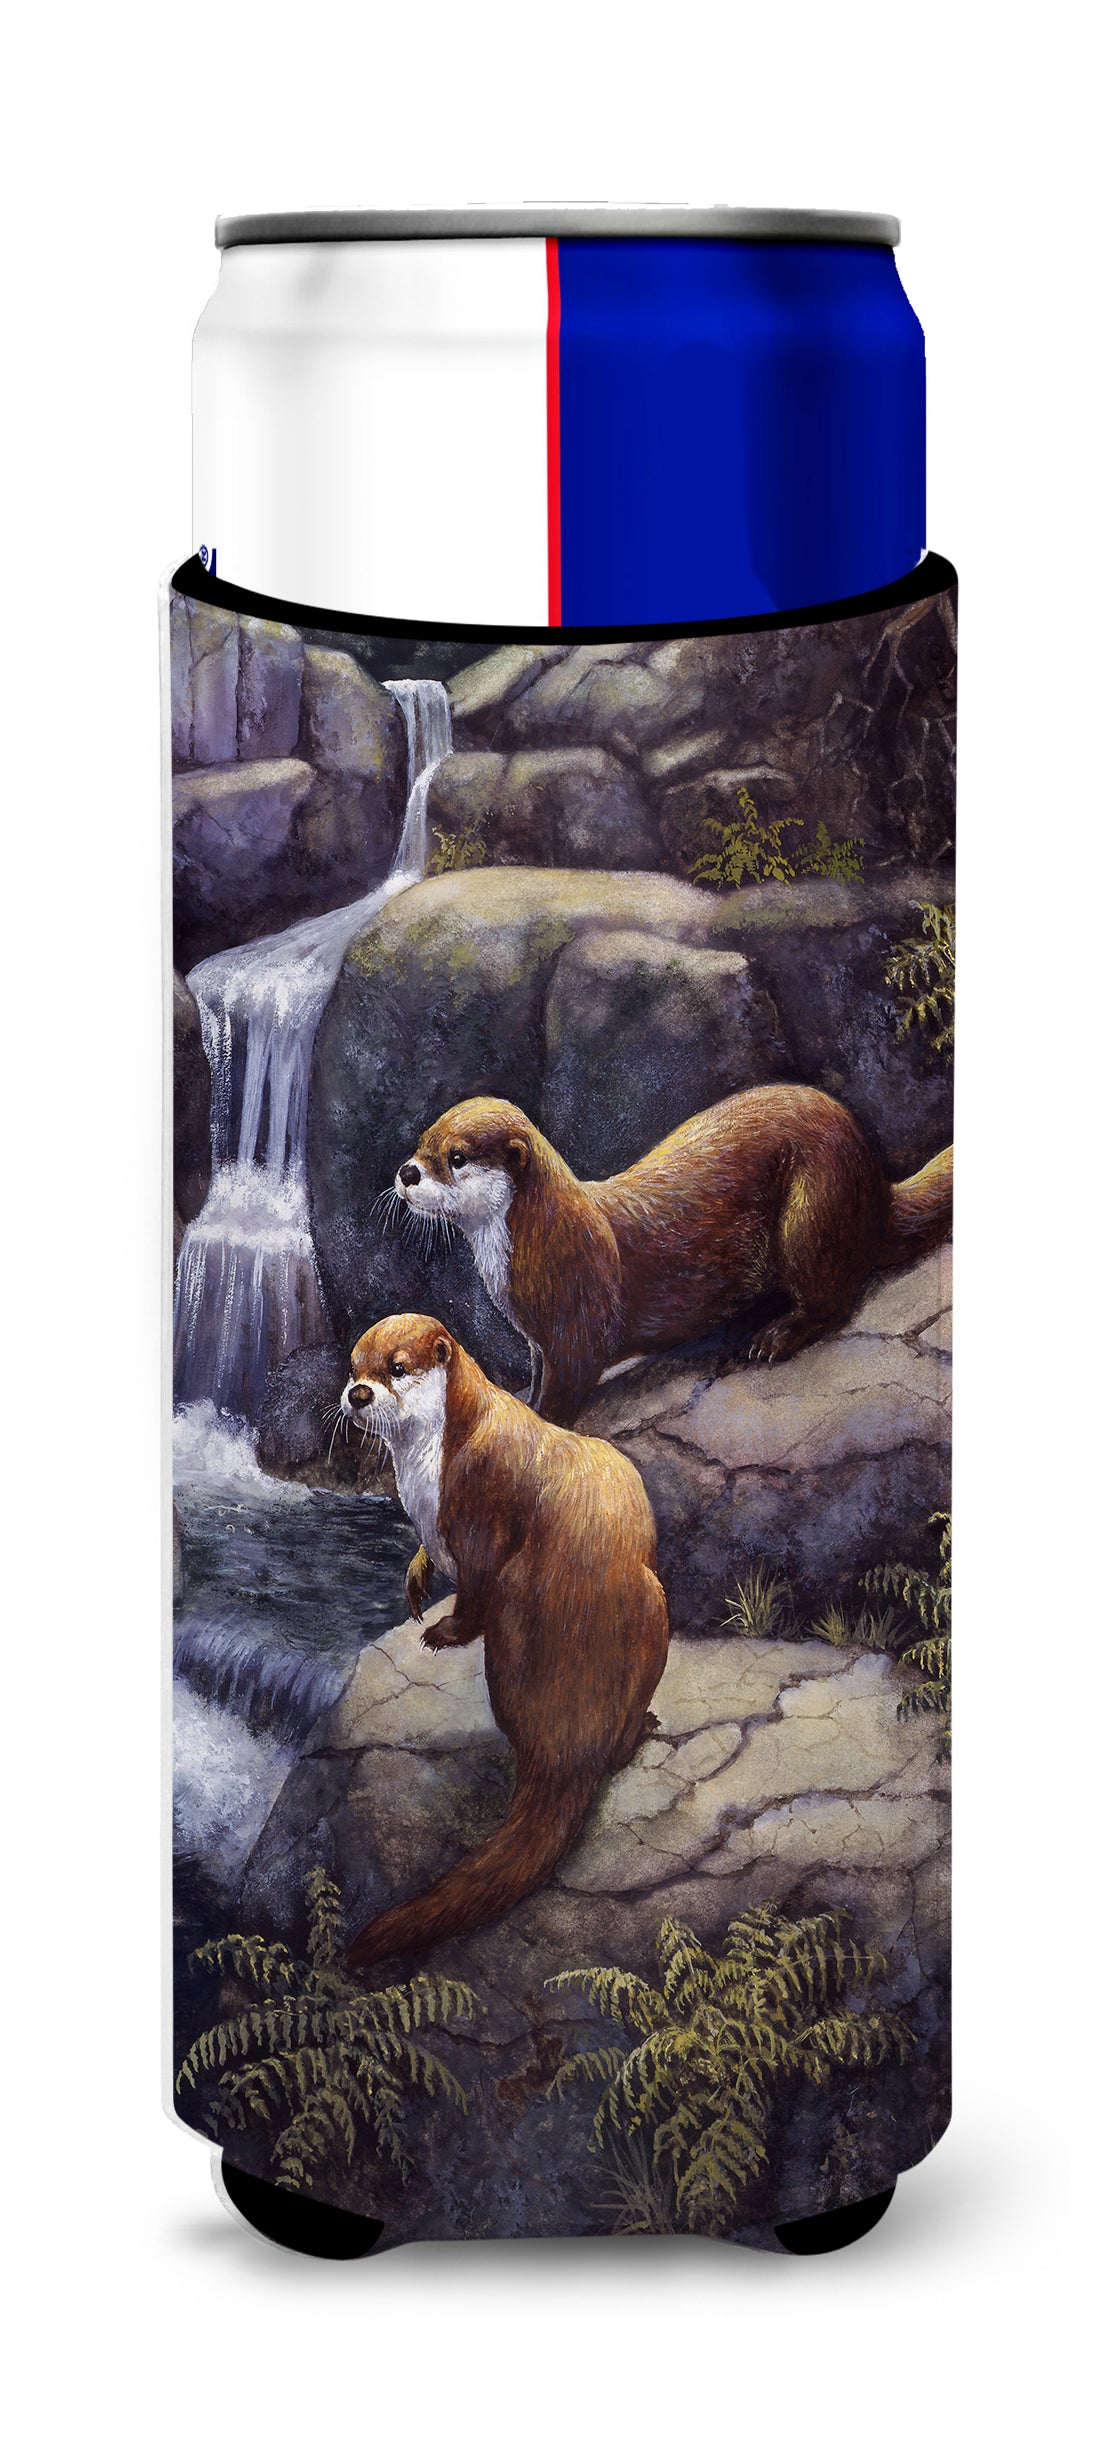 Otters by the Waterfall by Daphne Baxter Ultra Beverage Isolateurs pour canettes minces BDBA0293MUK